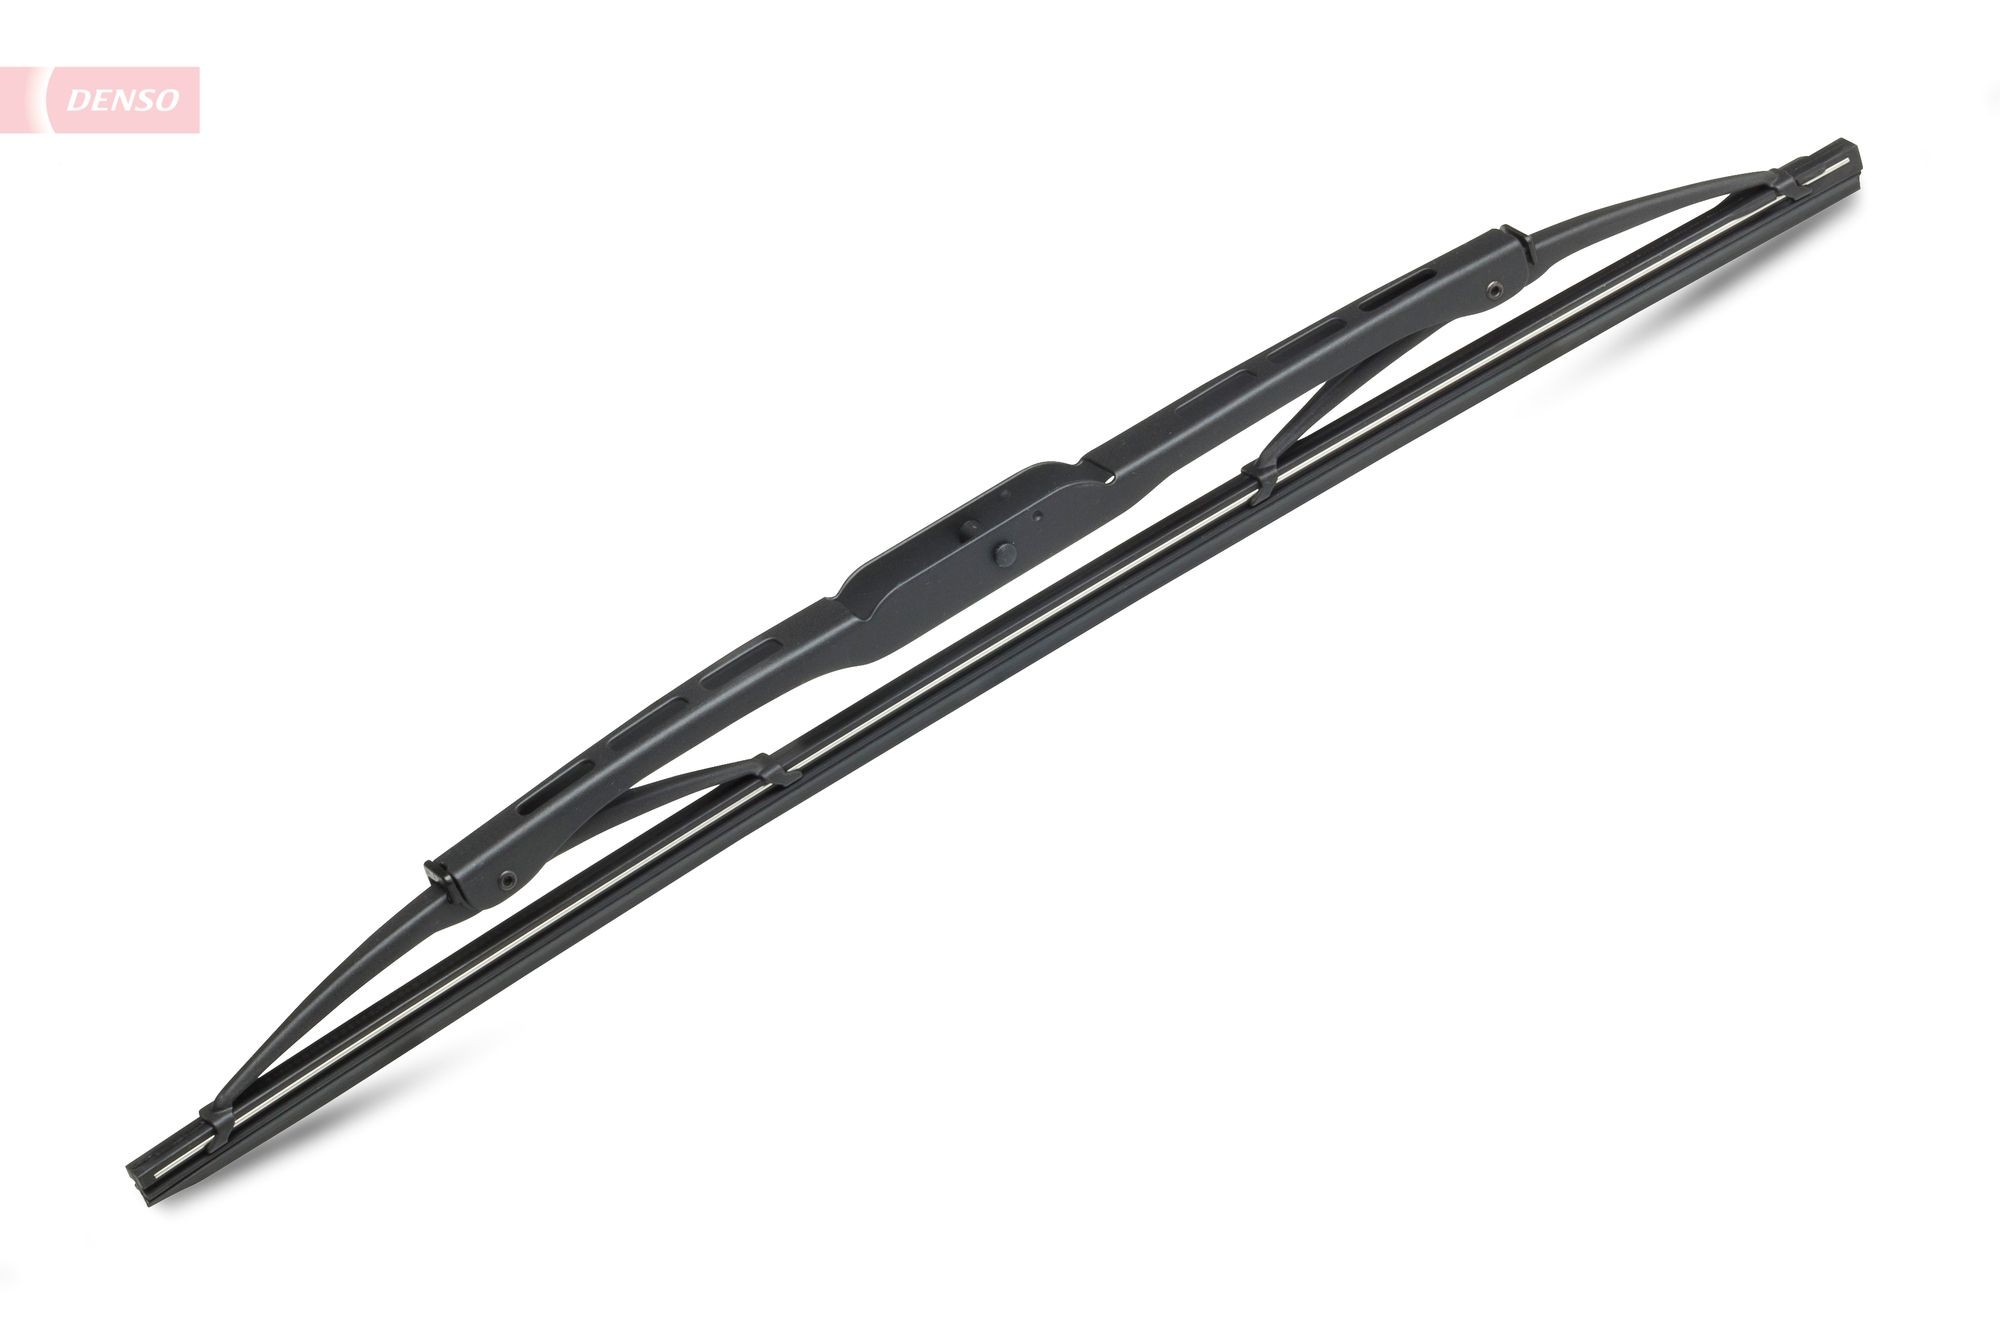 DENSO DM-038 Rear wiper blade MERCEDES-BENZ experience and price